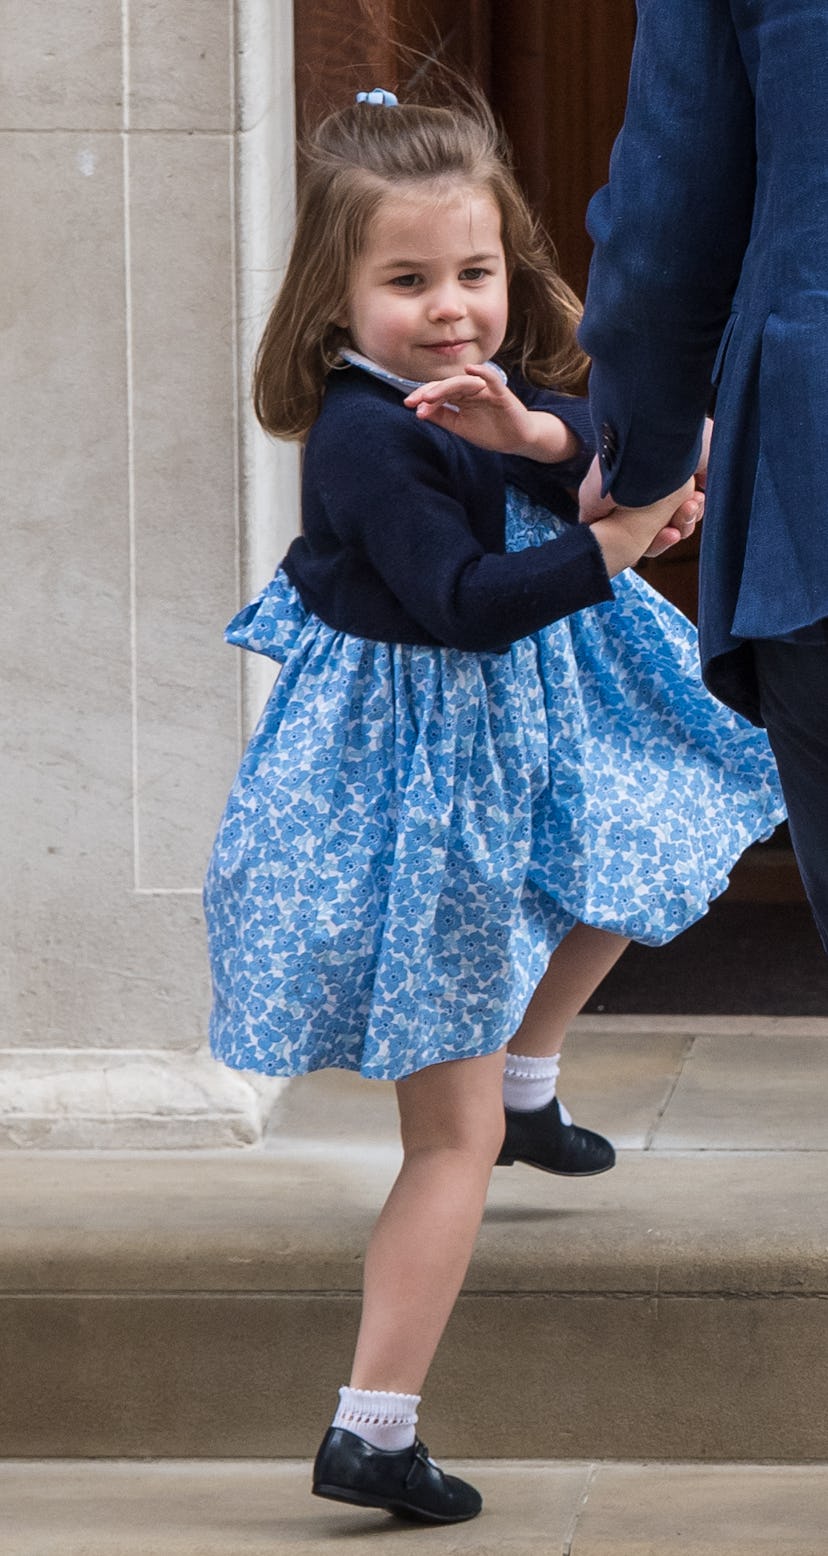 Princess Charlotte visiting the hospital in 2018.